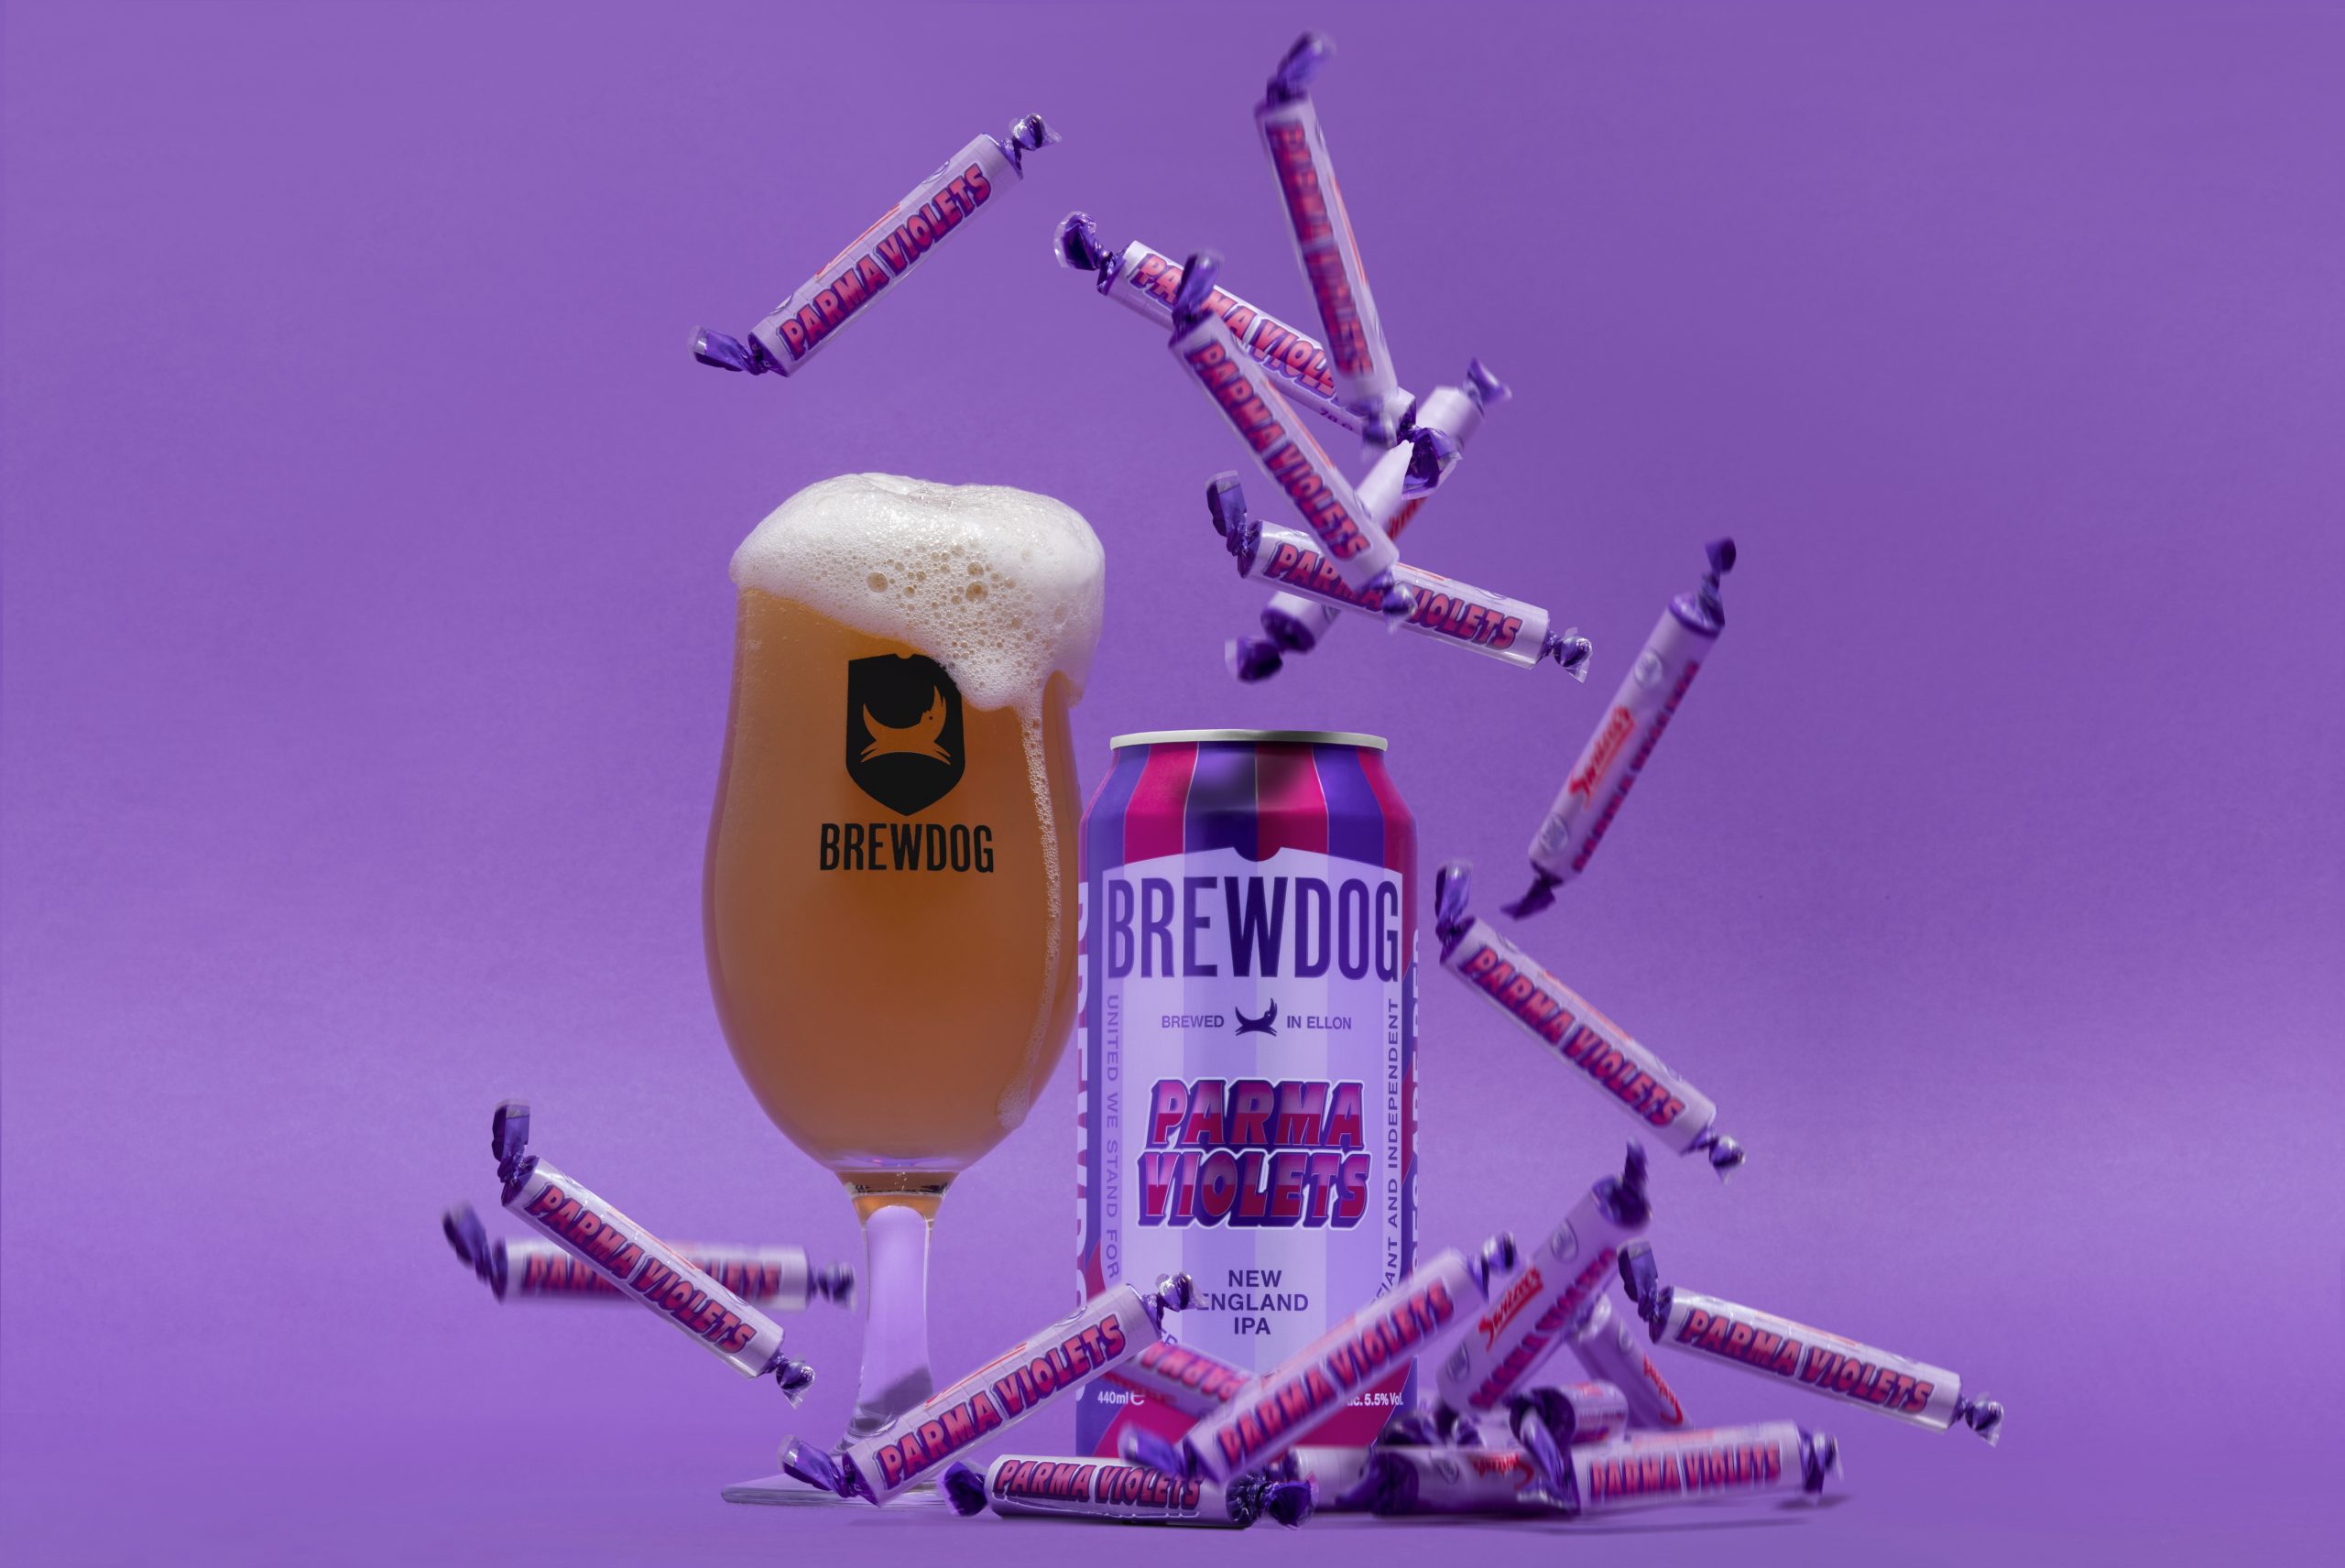 Can and glass of new Parme Violet beer: BrewDog launches Parma Violet flavoured beer